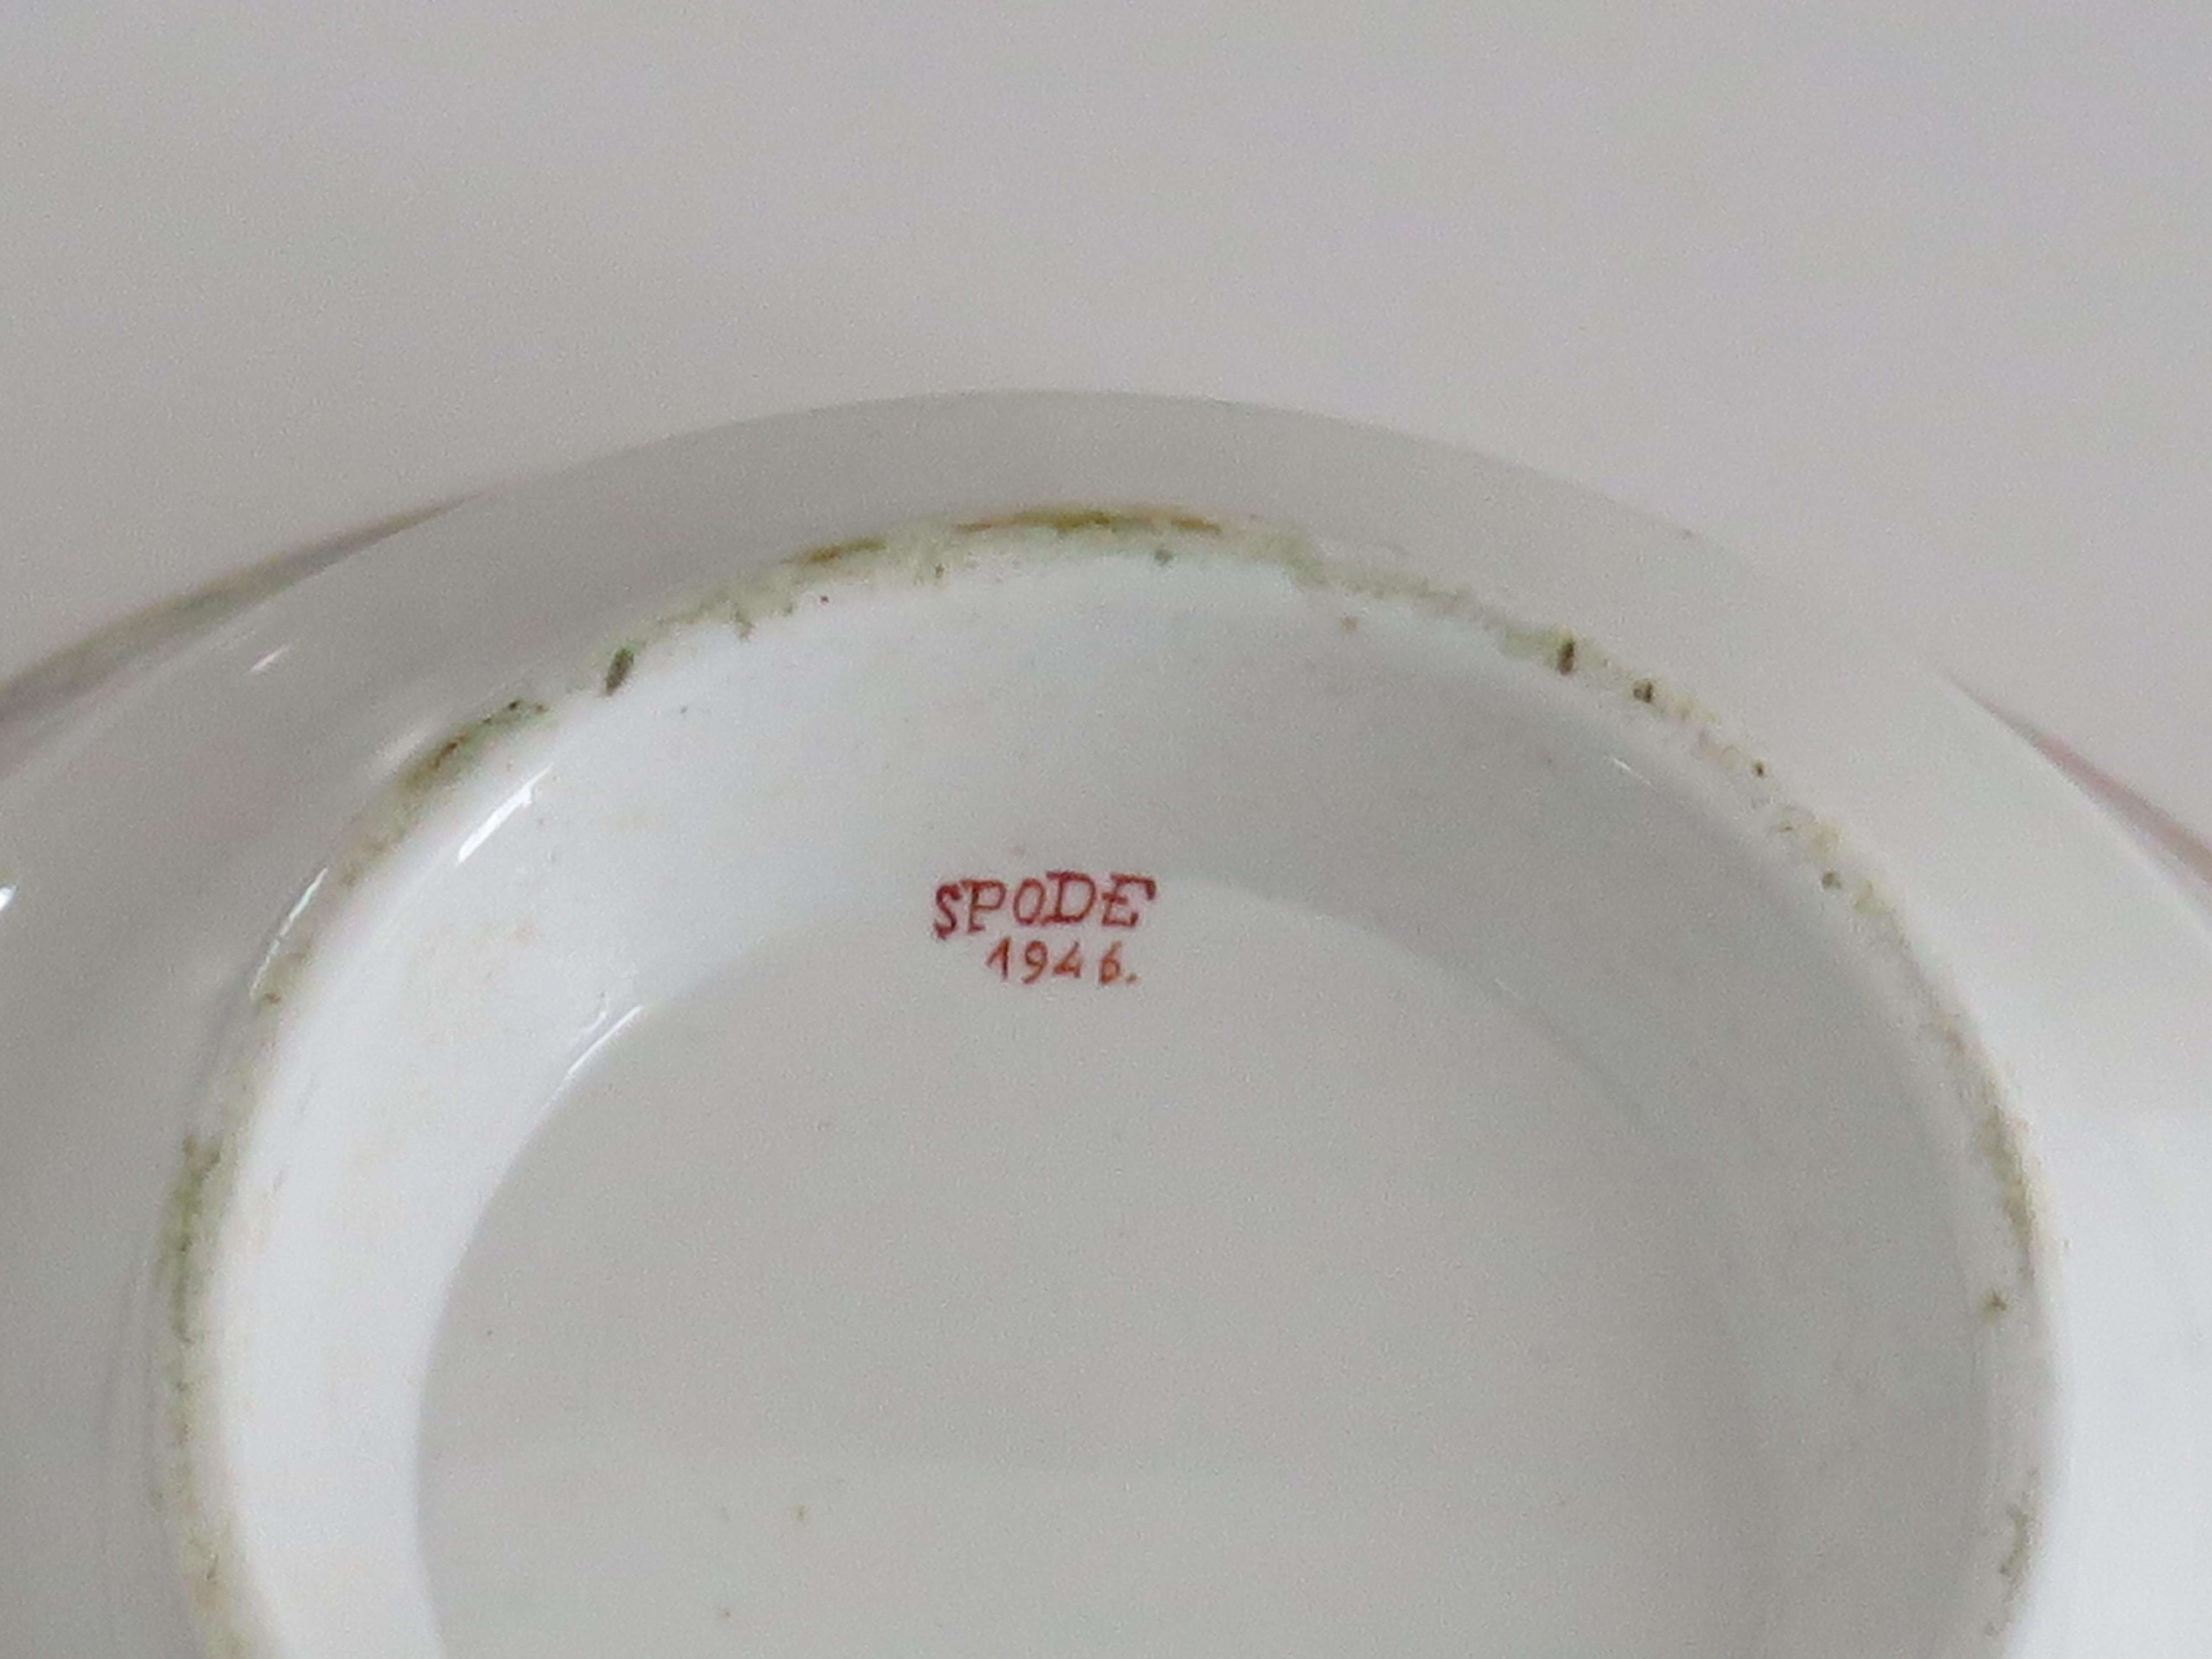 Early 19th Century Spode Porcelain Slop Bowl in Japan Ptn 1946, circa 1810 For Sale 7